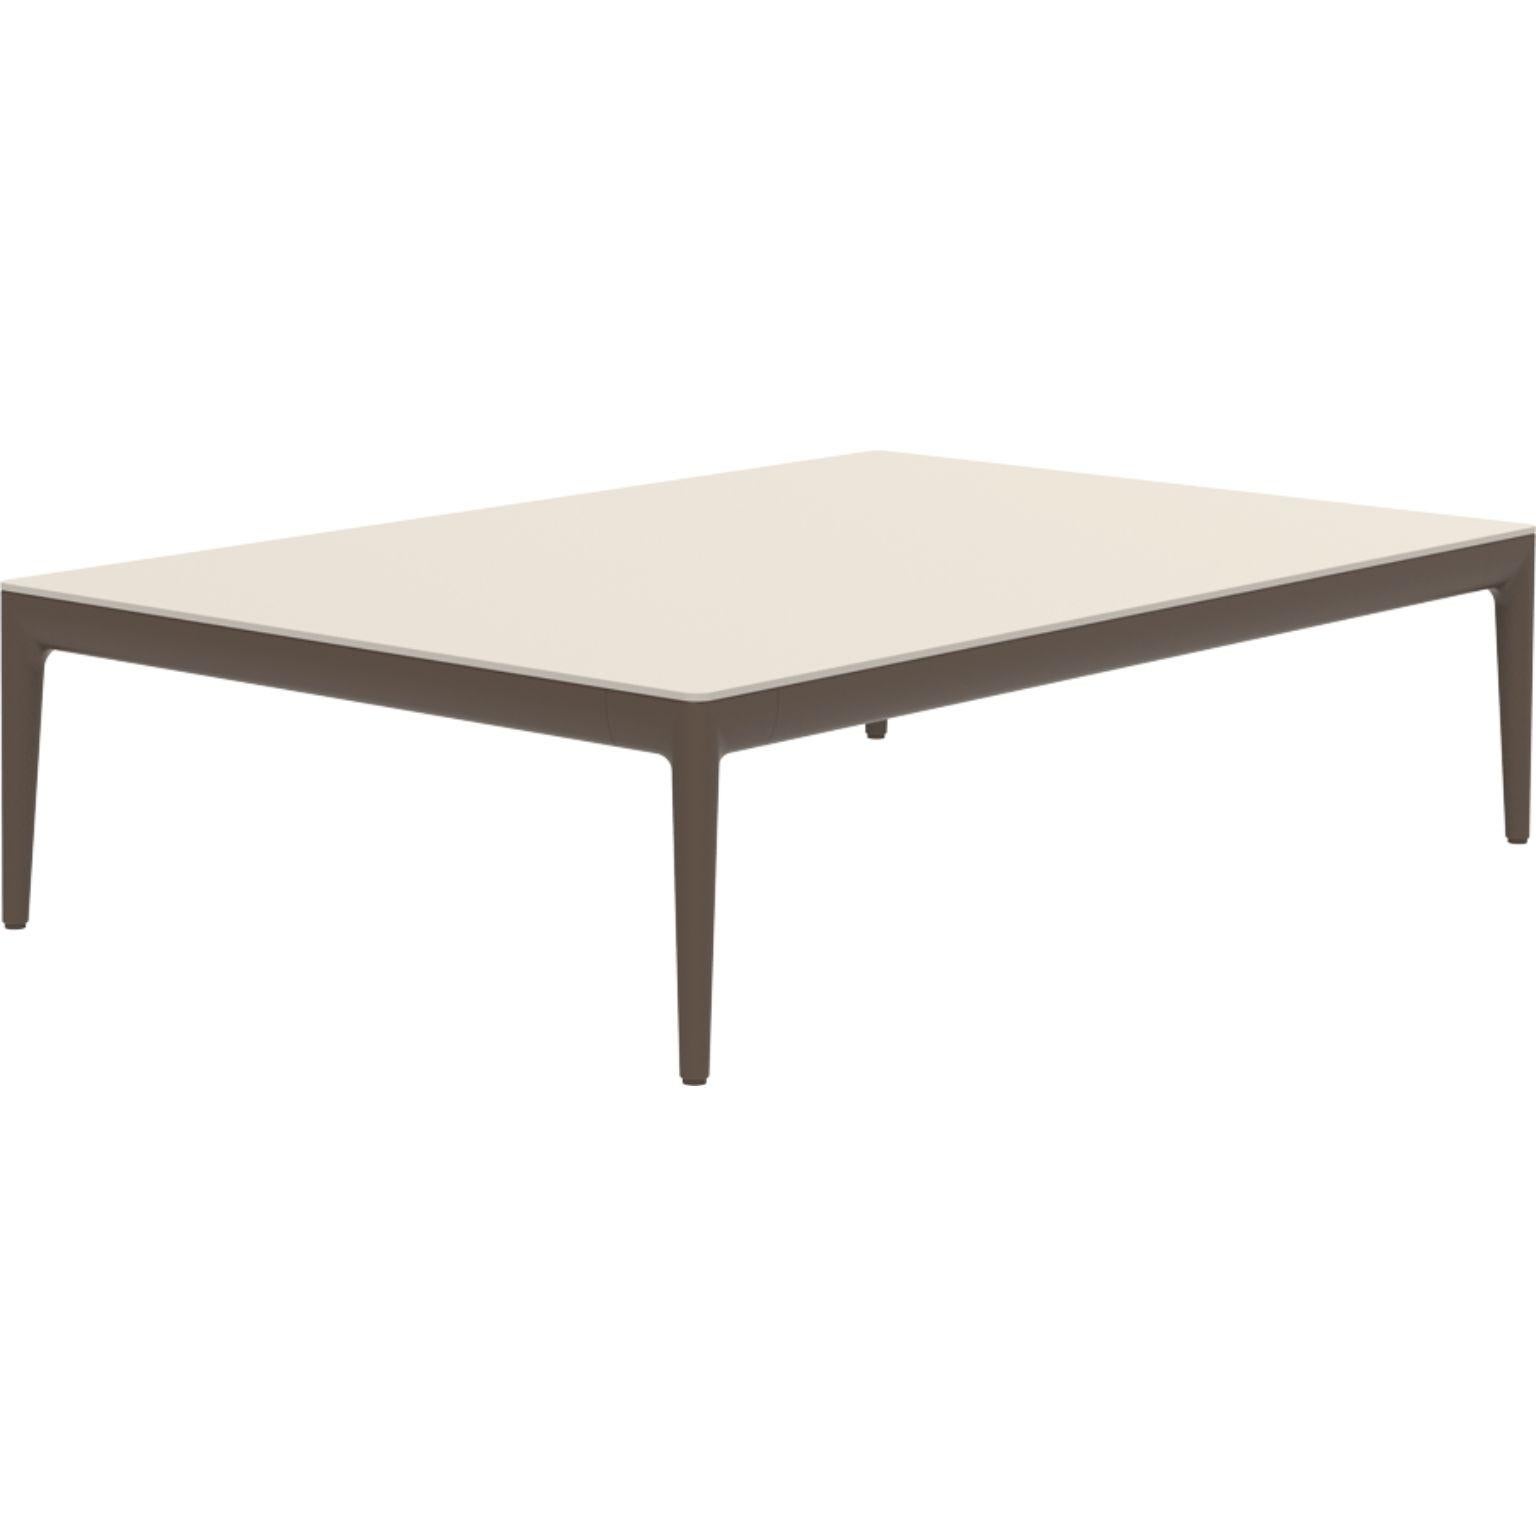 Ribbons bronze 115 coffee table by MOWEE
Dimensions: D 76 x W 115 x H 29 cm
Material: Aluminum and HPL top.
Weight: 14.5 kg.
Also available in different colors and finishes. (HPL Black Edge or Neolith top).

An unmistakable collection for its